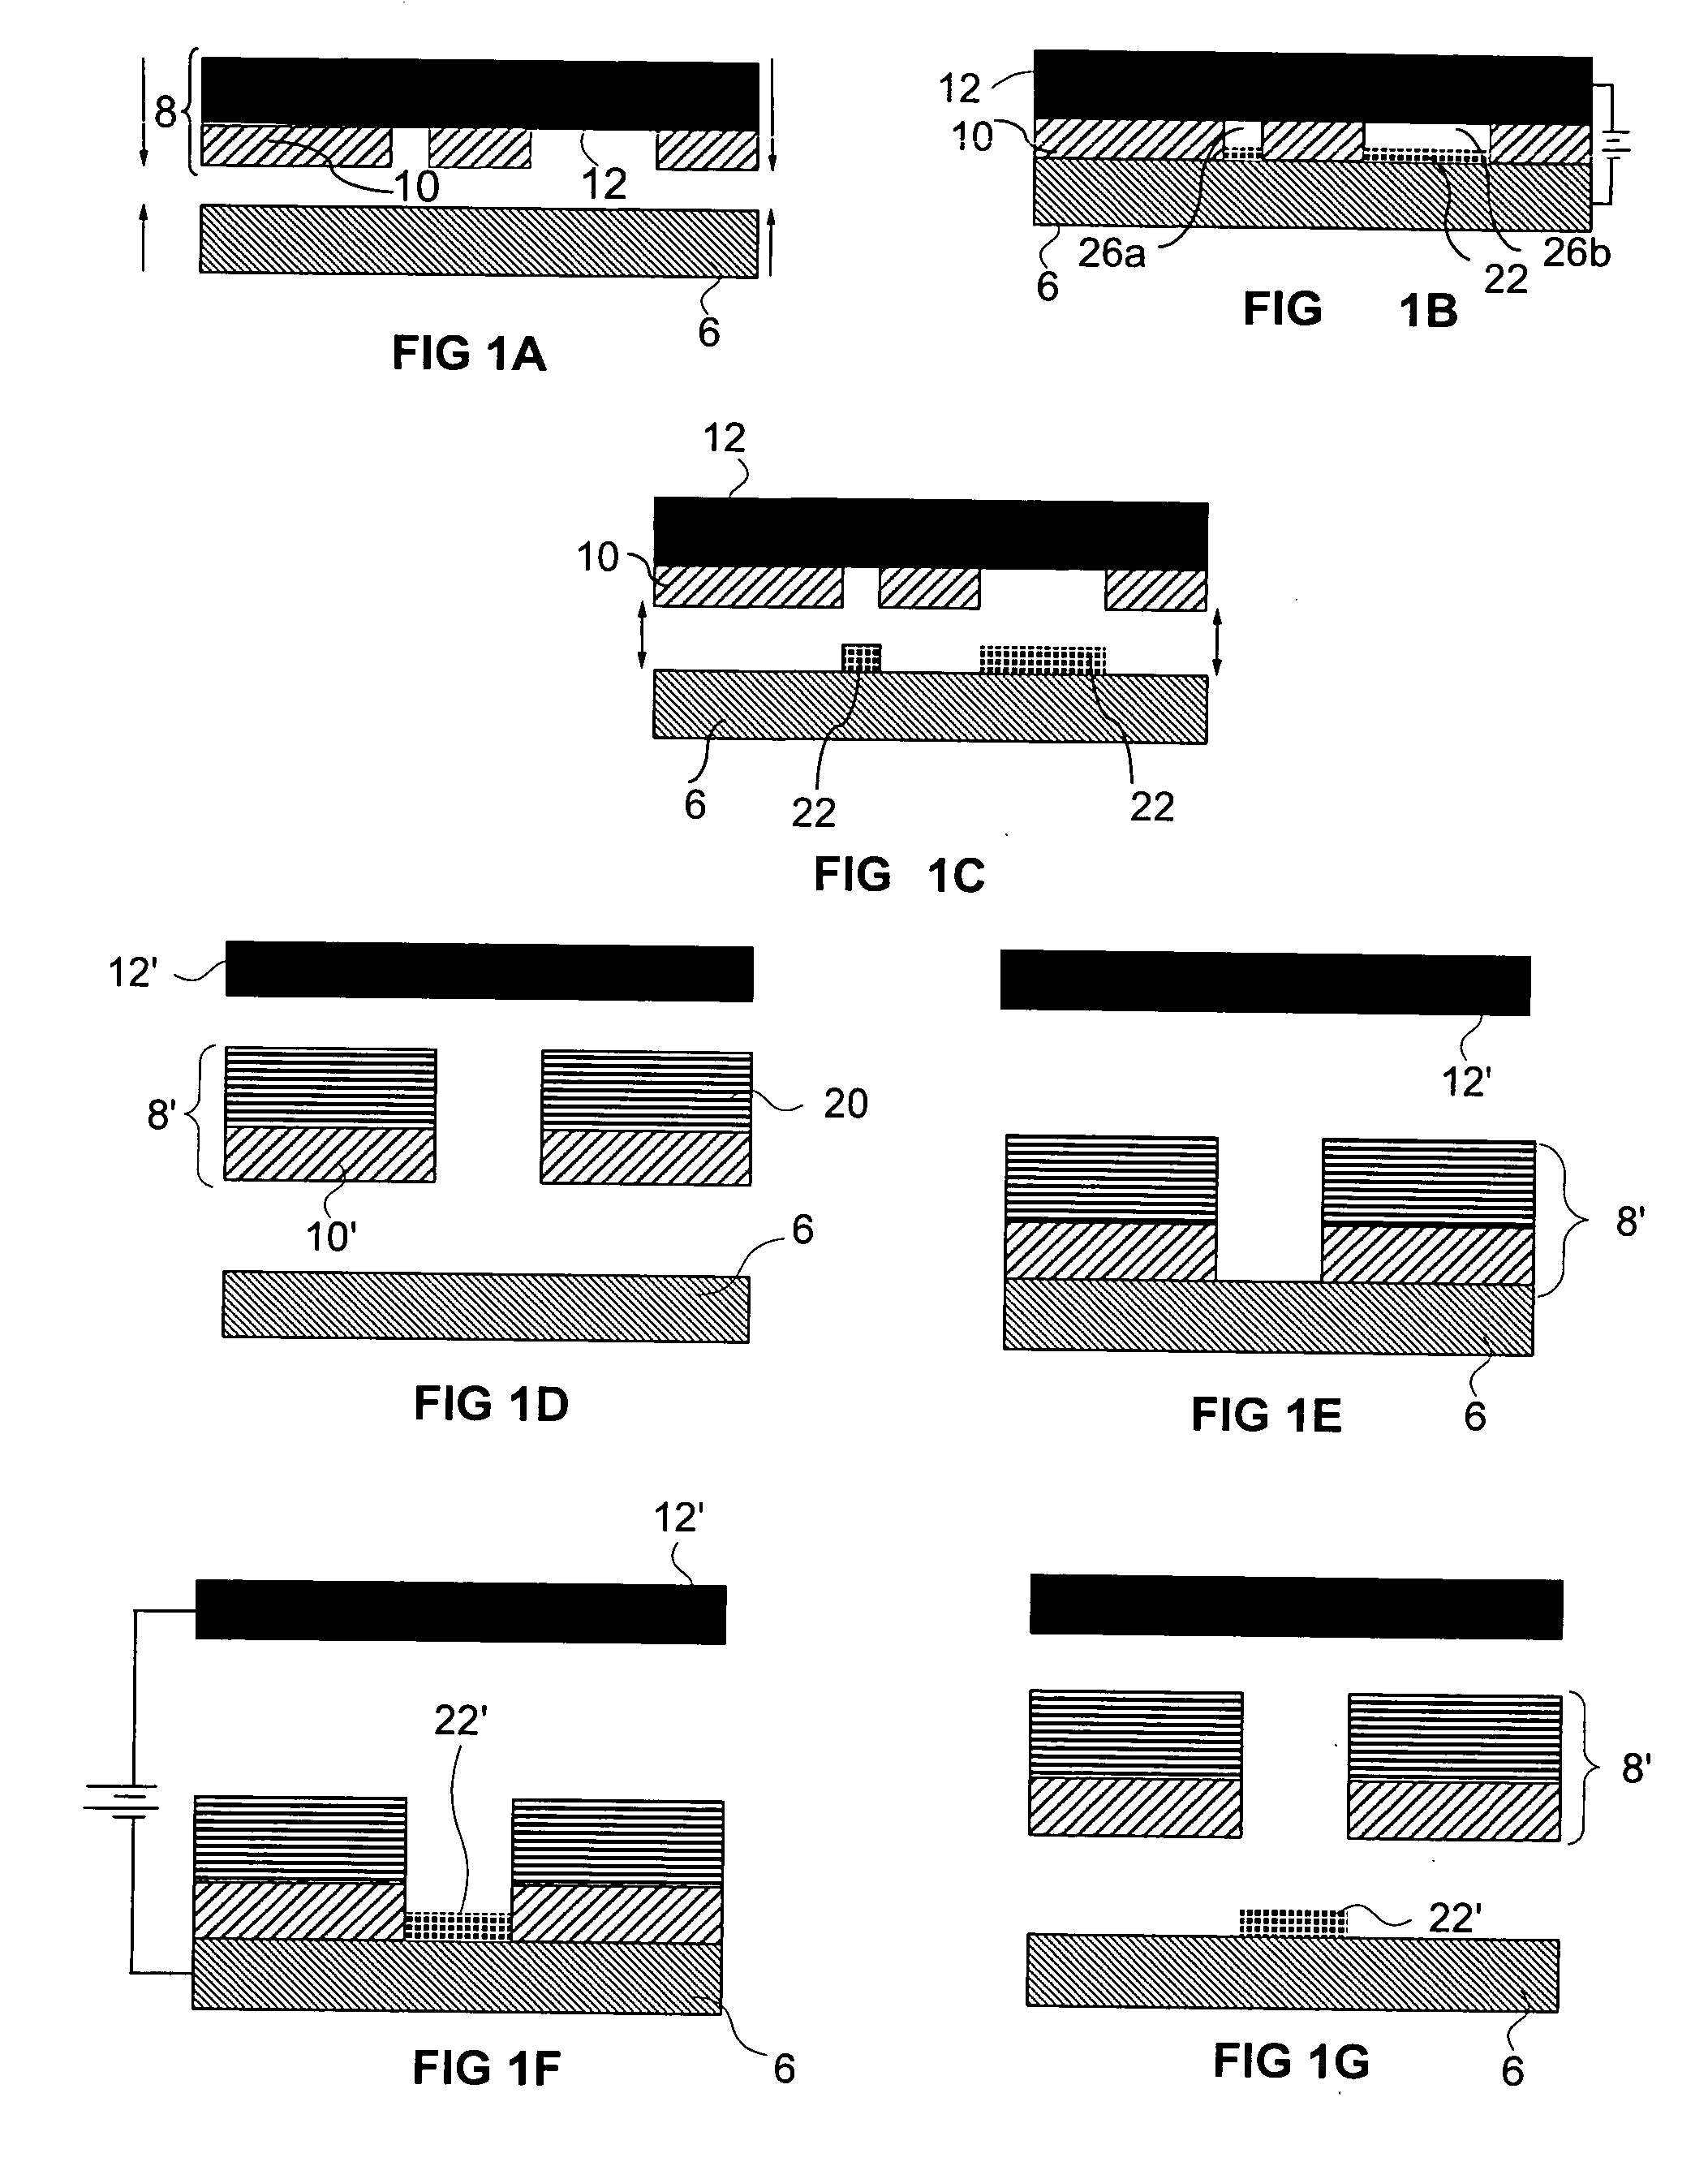 Electrochemical fabrication methods incorporating dielectric materials and/or using dielectric substrates